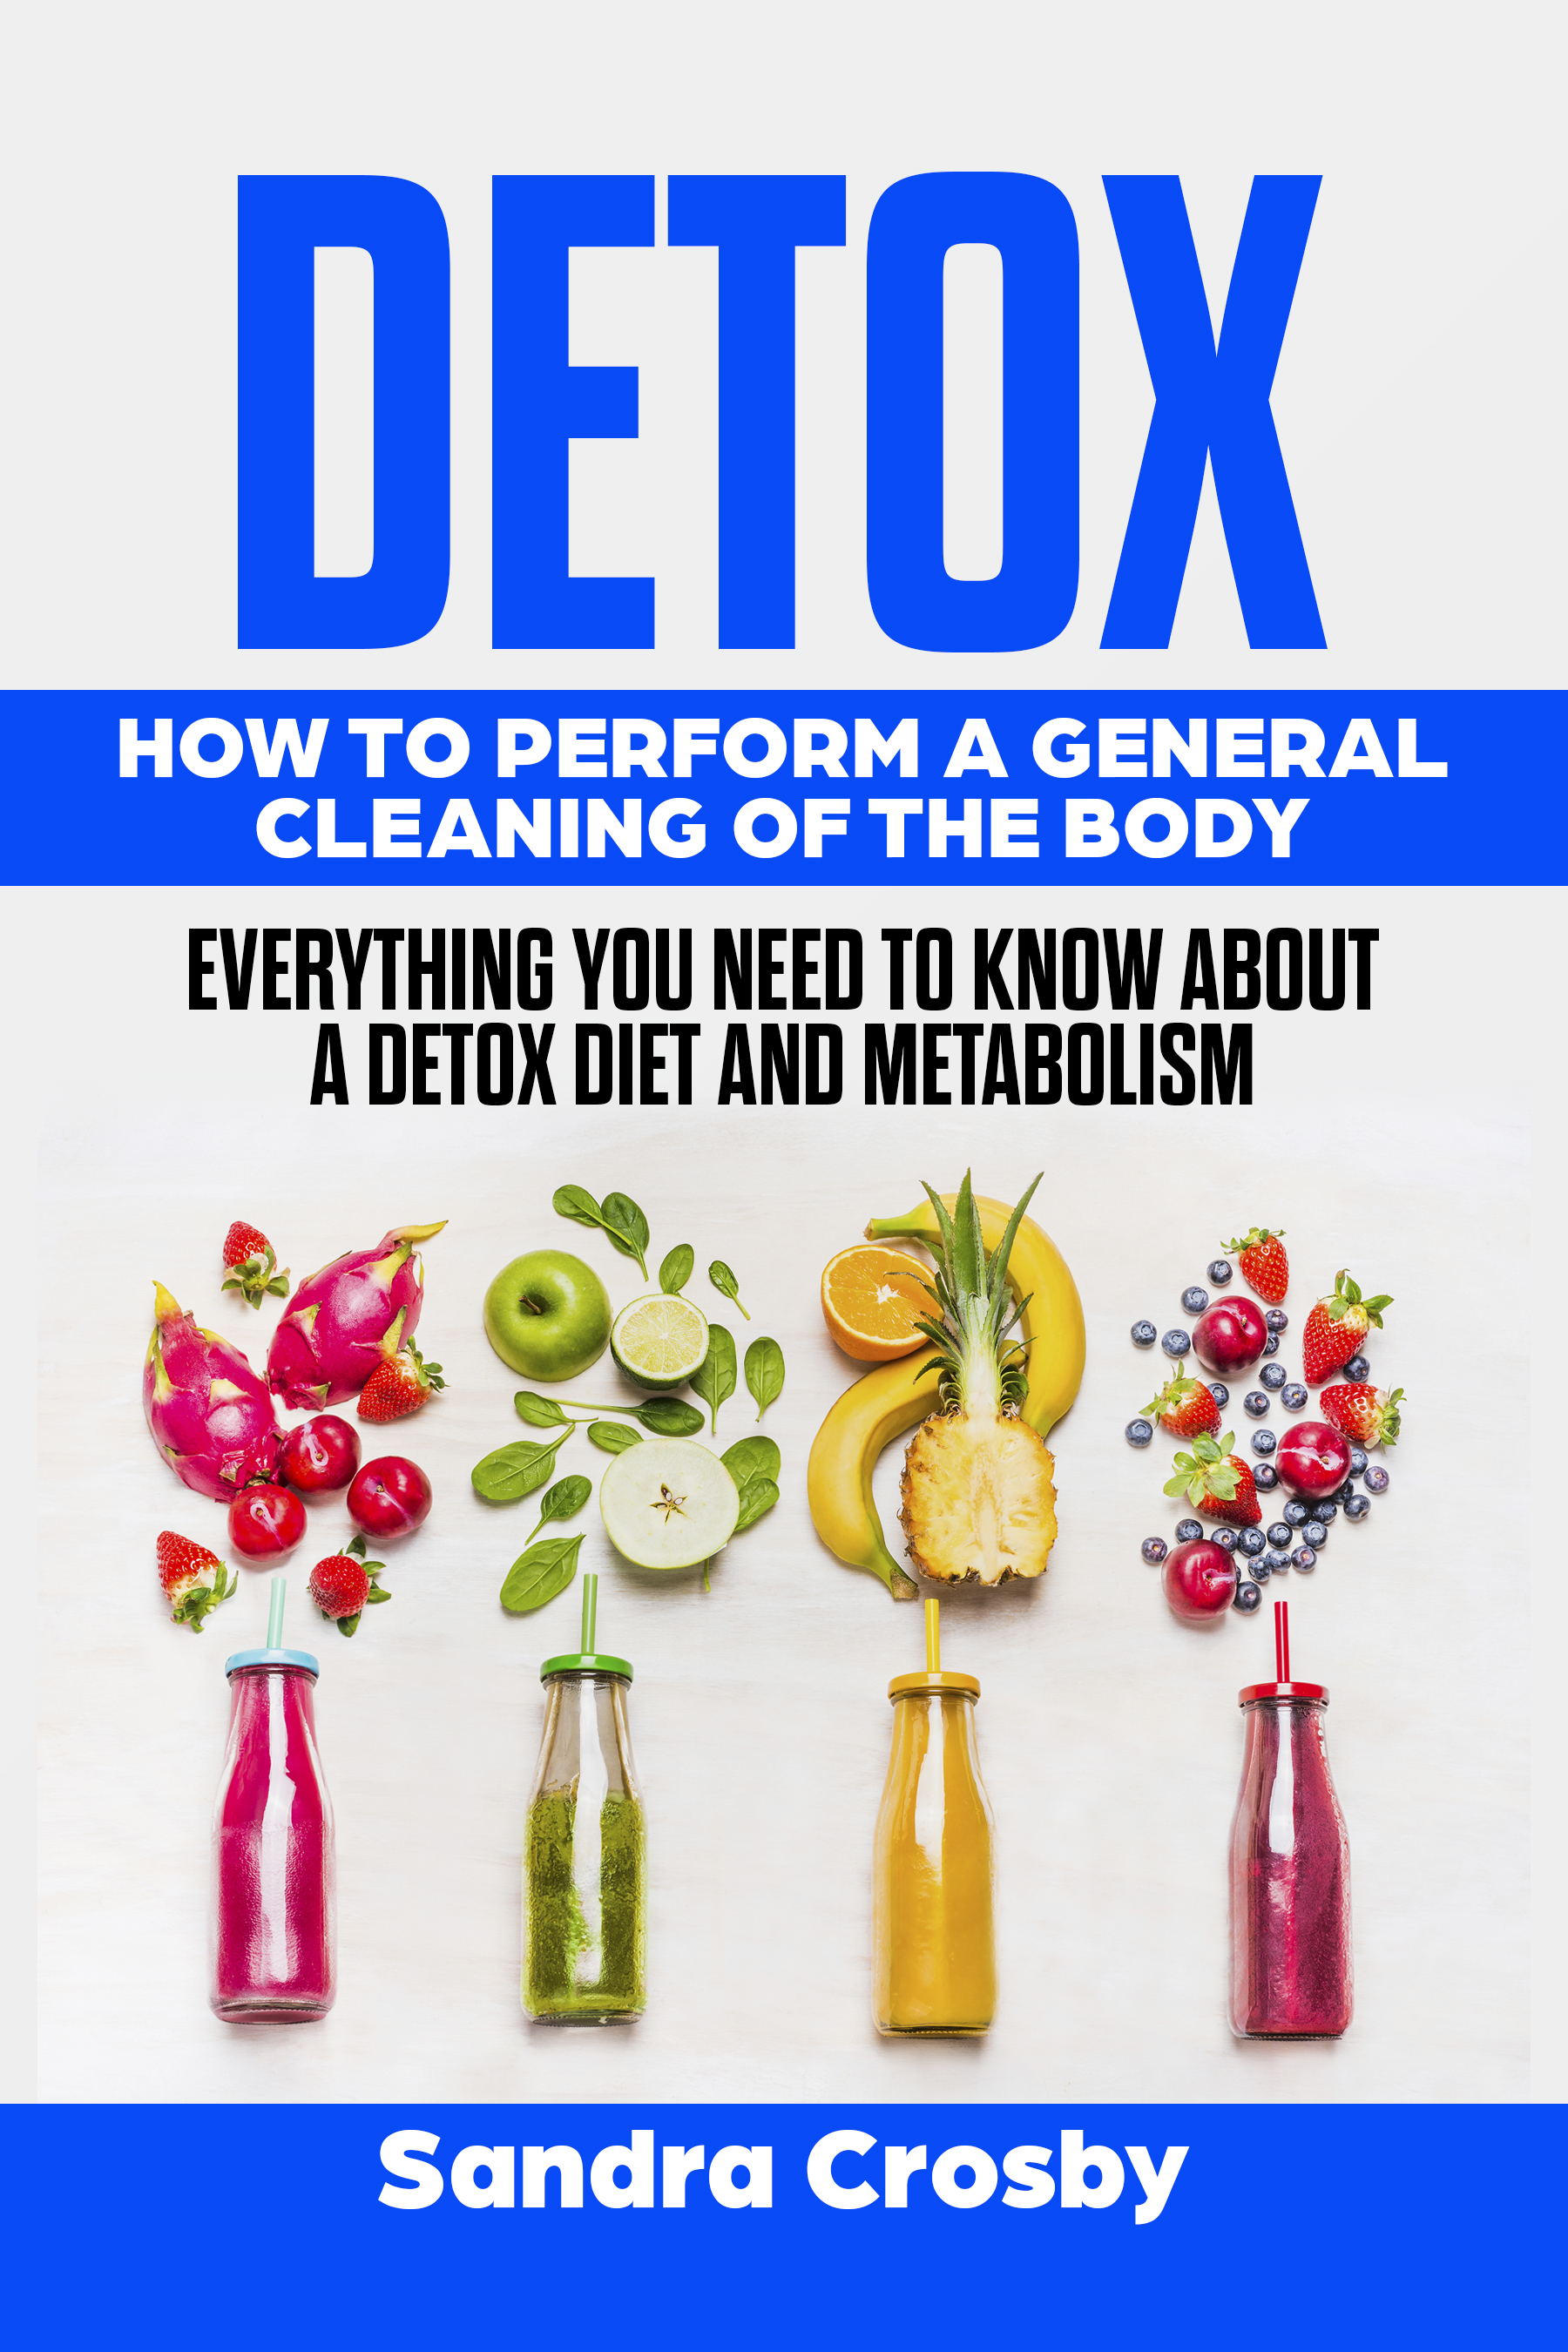 FREE: Detox: How to Perform a General Cleaning of the Body by Sandra Crosby